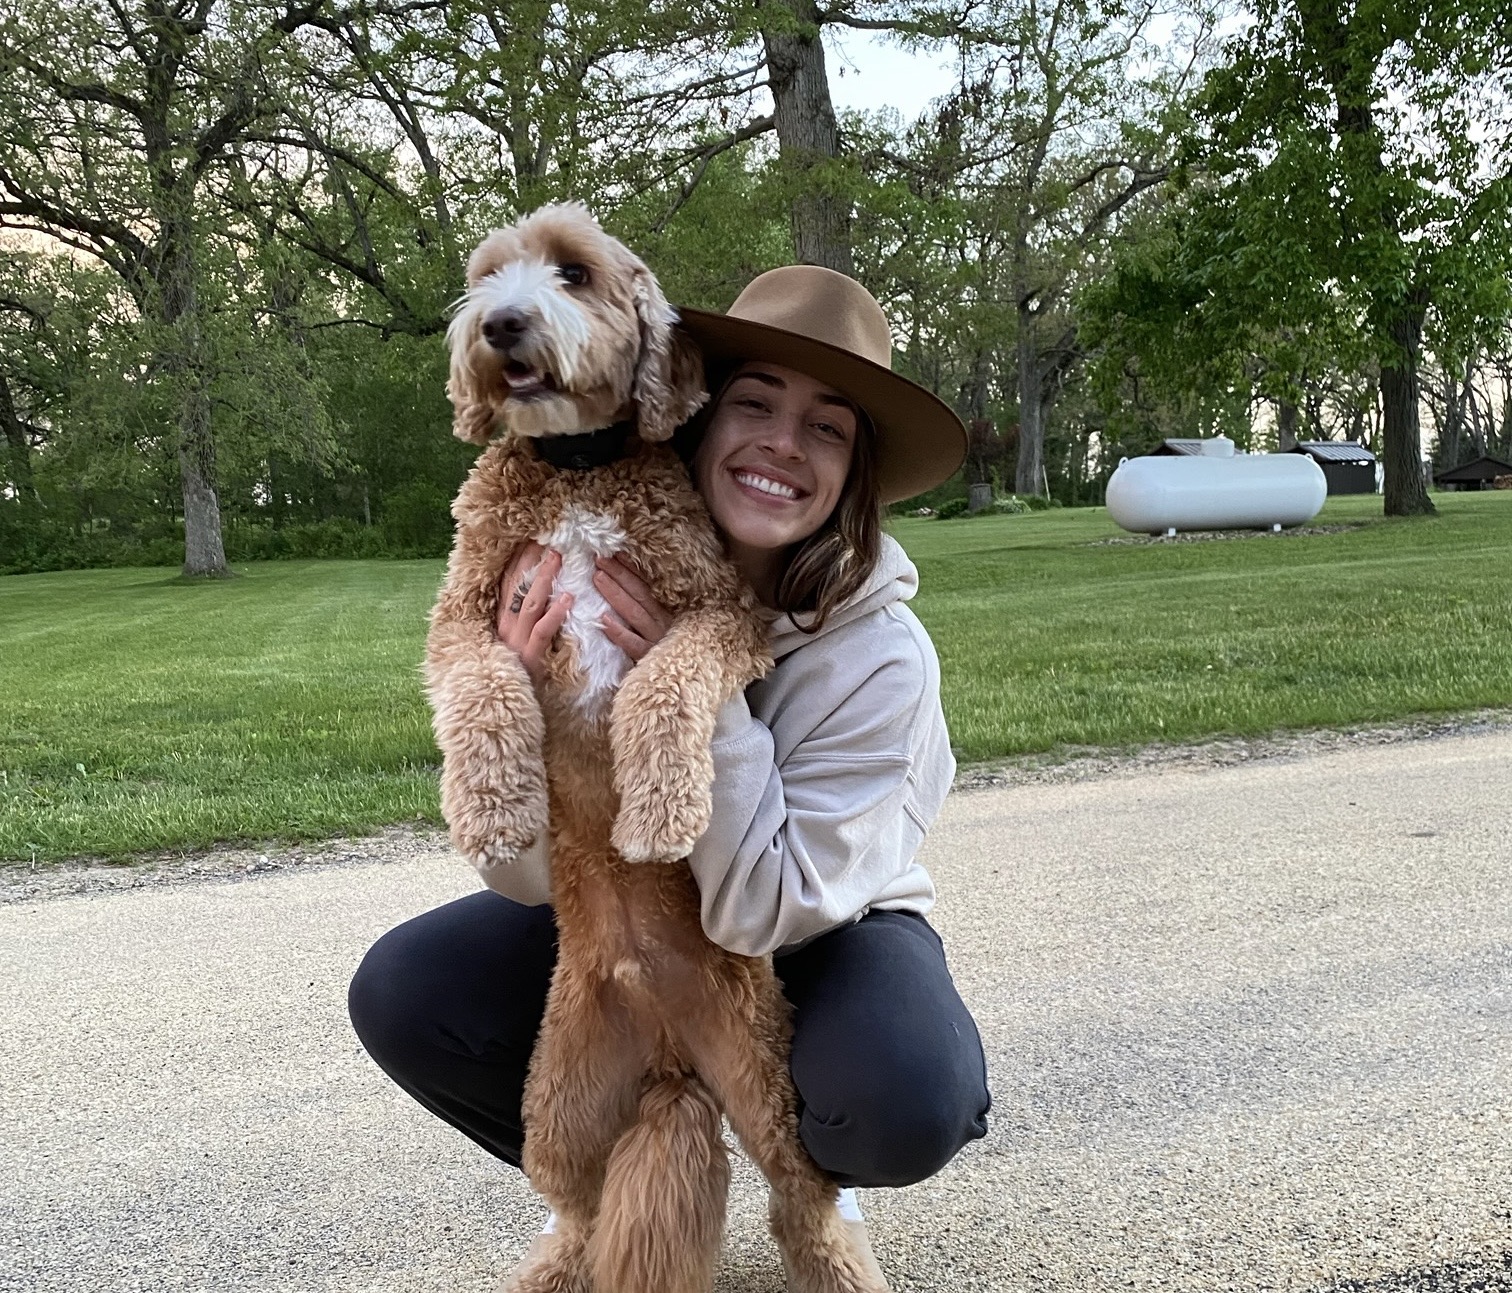 Dani Chamberlain poses outside with a fluffy dog standing on its hind legs.